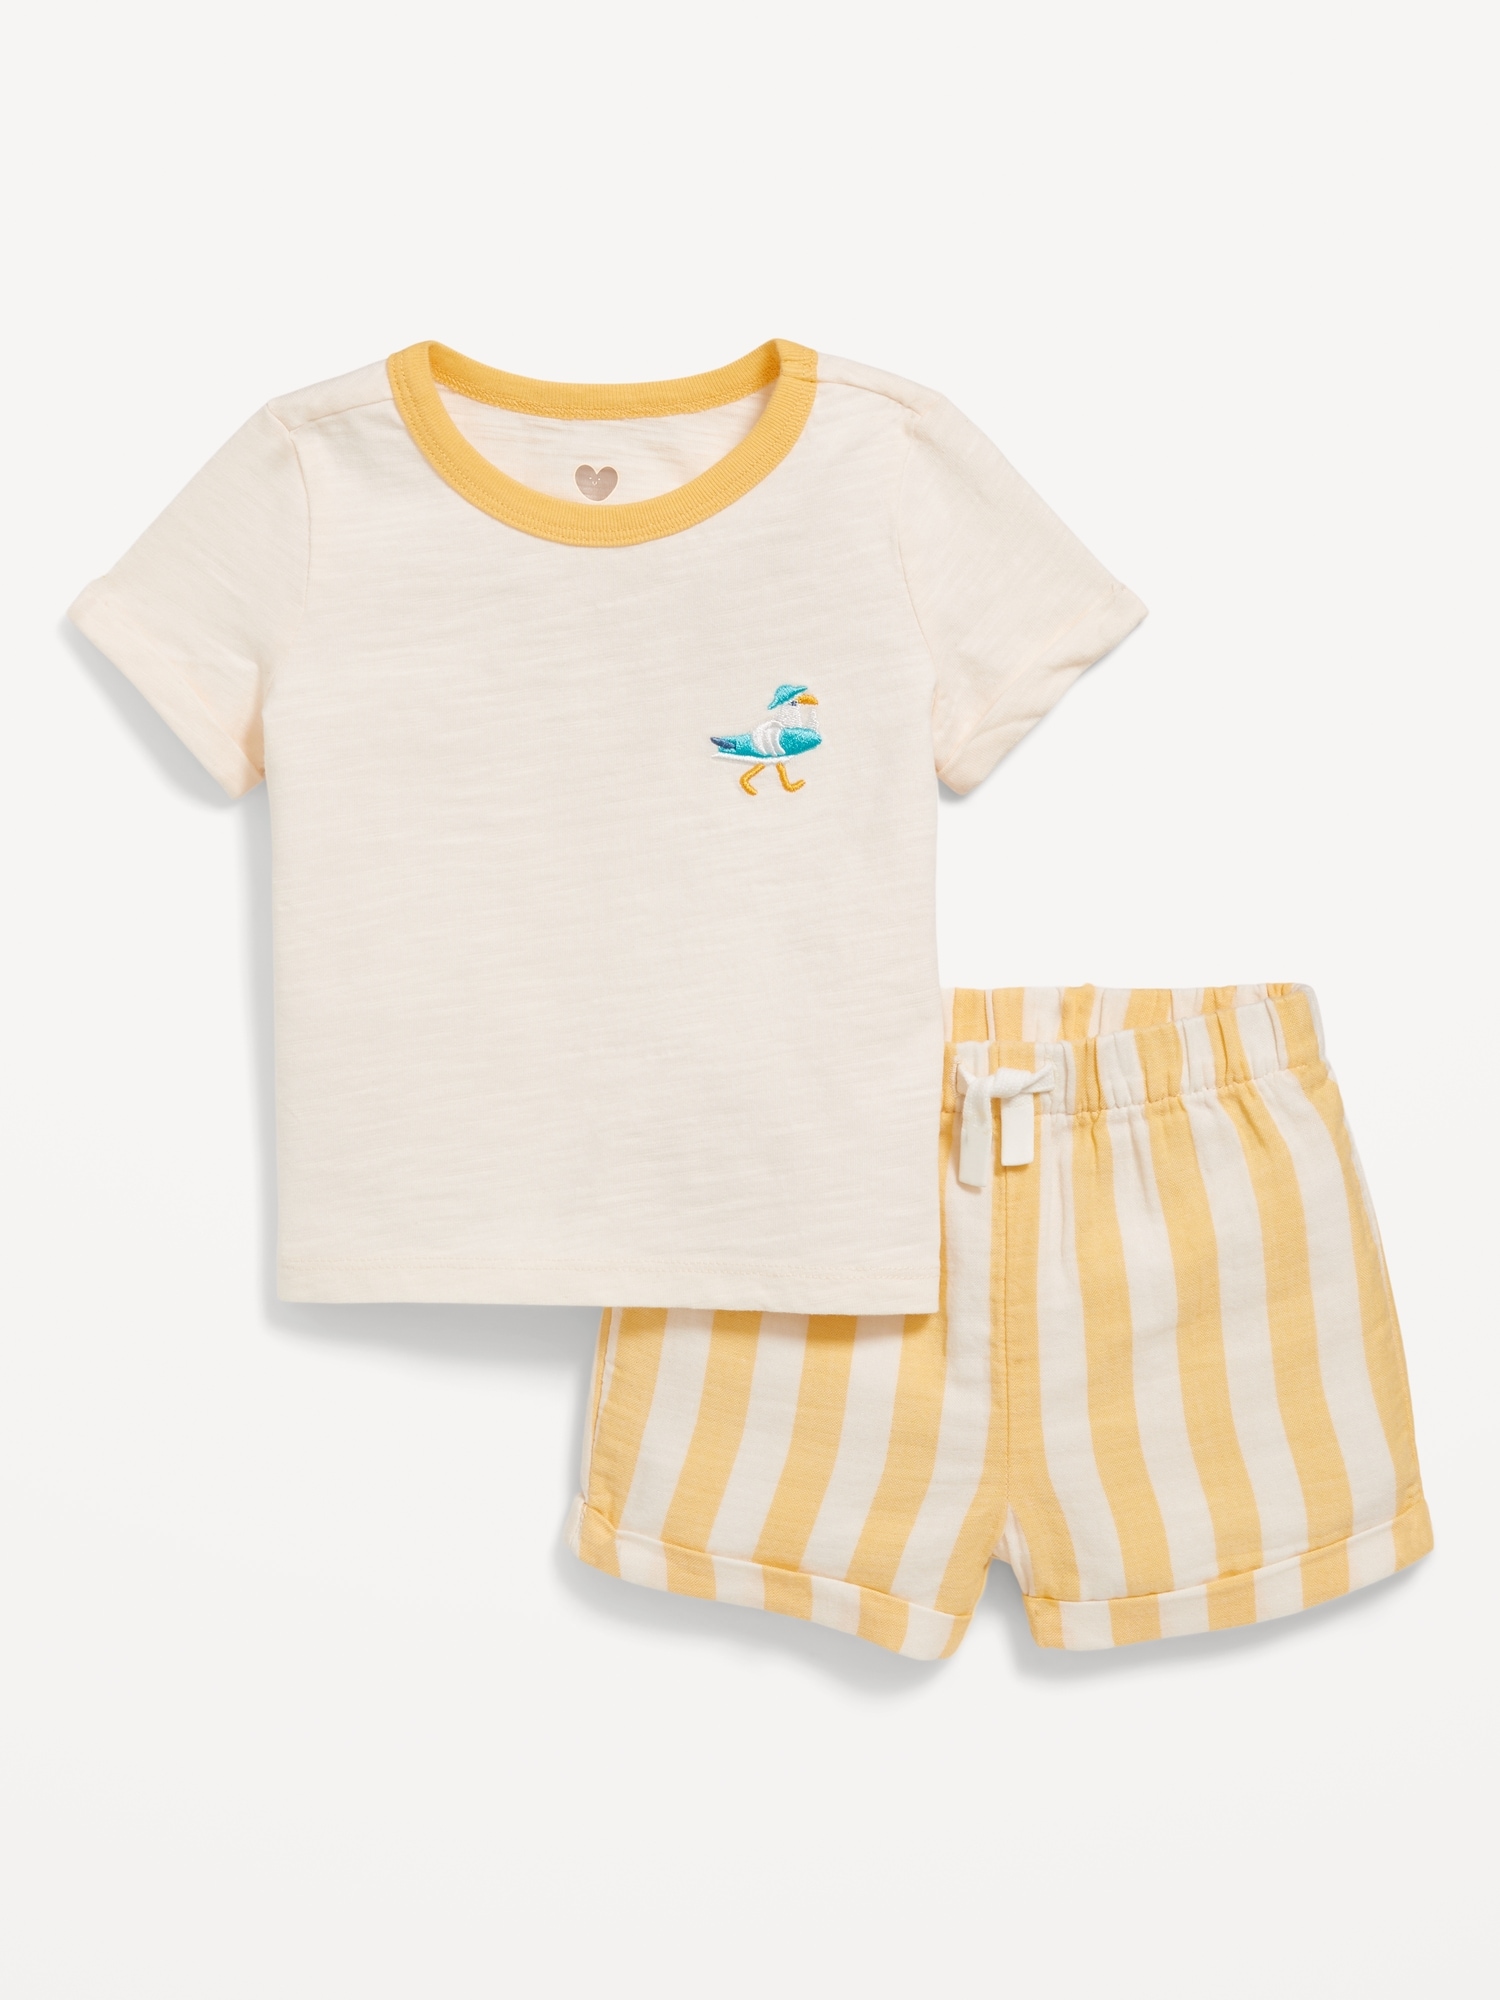 Little Navy Organic-Cotton Graphic T-Shirt and Shorts Set for Baby